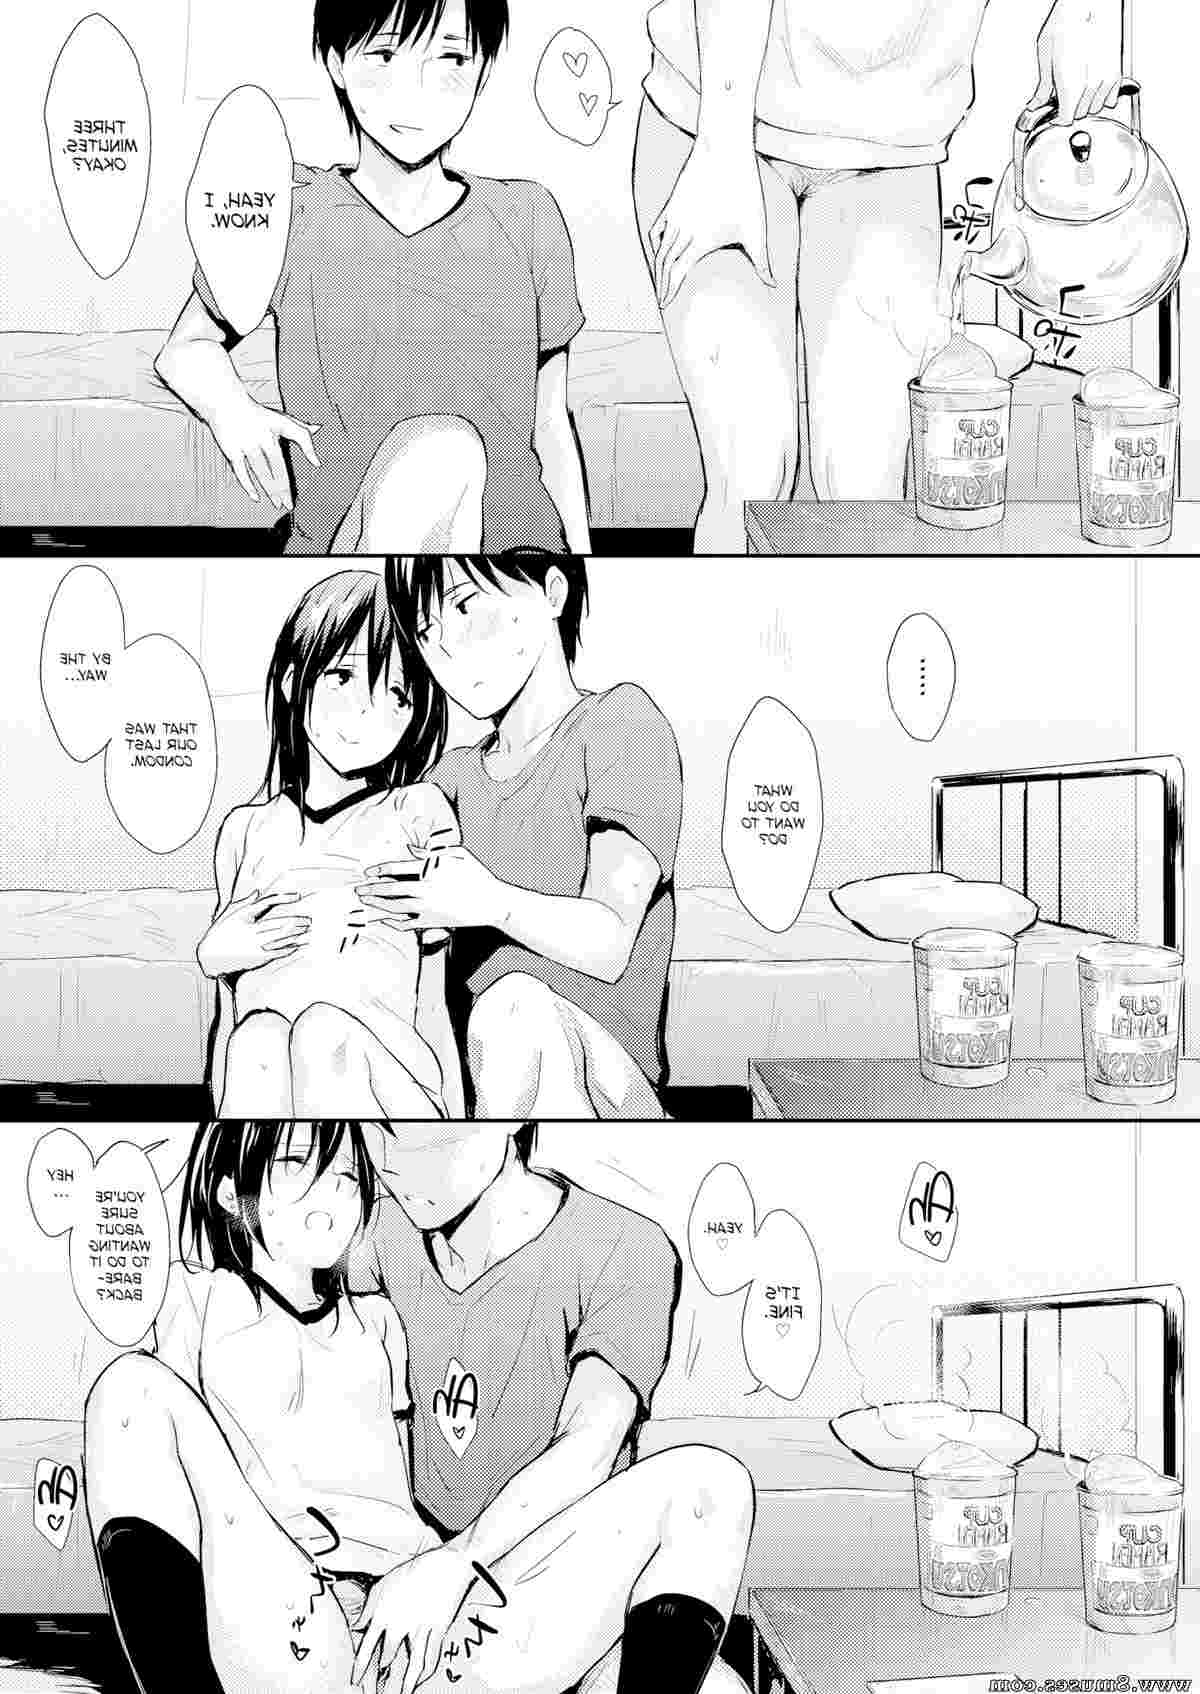 Fakku-Comics/NaPaTa/Lunch-Time Lunch_Time__8muses_-_Sex_and_Porn_Comics_12.jpg